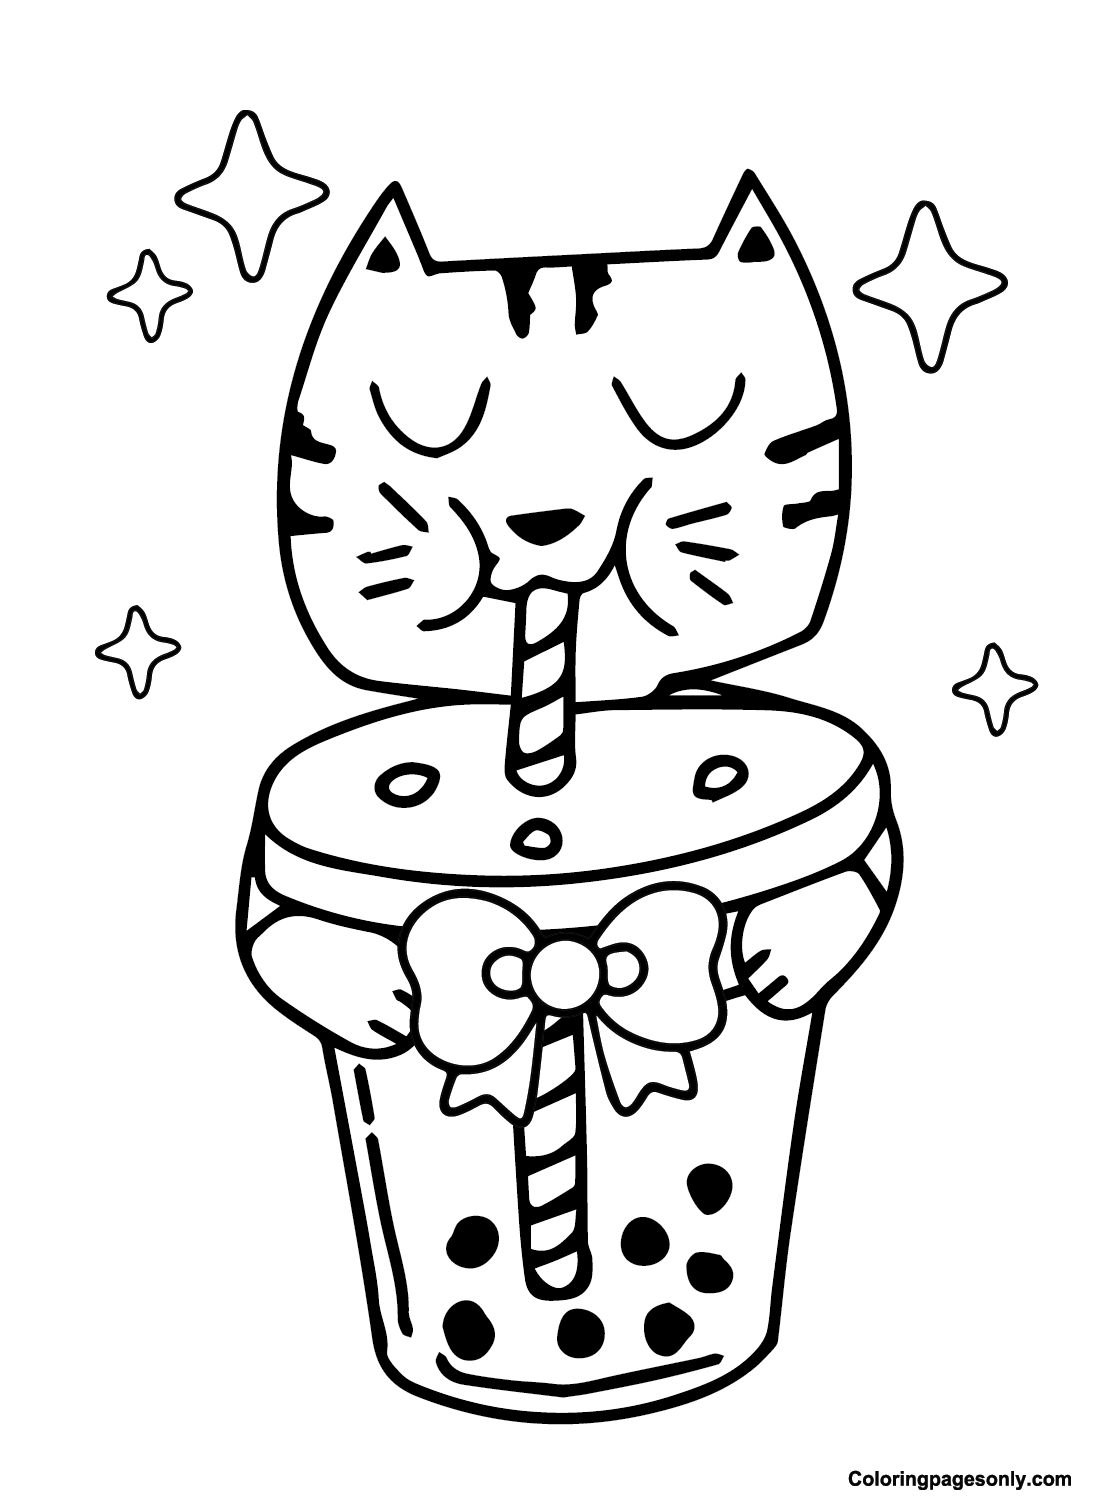 Pictures Boba Tea Coloring Page